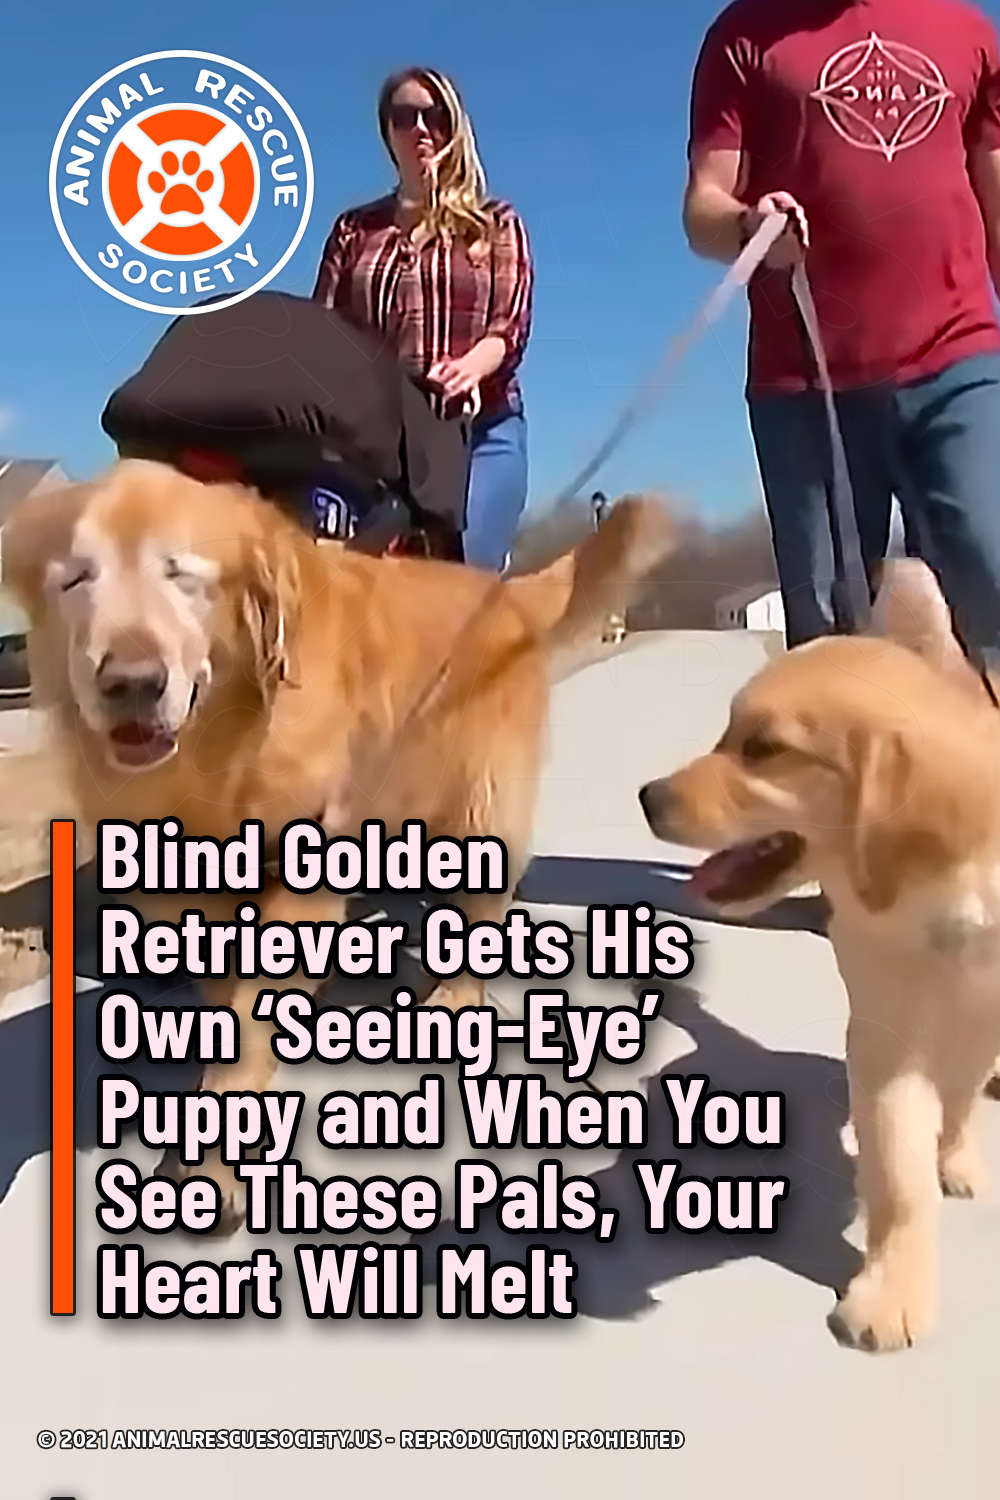 Blind Golden Retriever Gets His Own ‘Seeing-Eye’ Puppy and When You See These Pals, Your Heart Will Melt